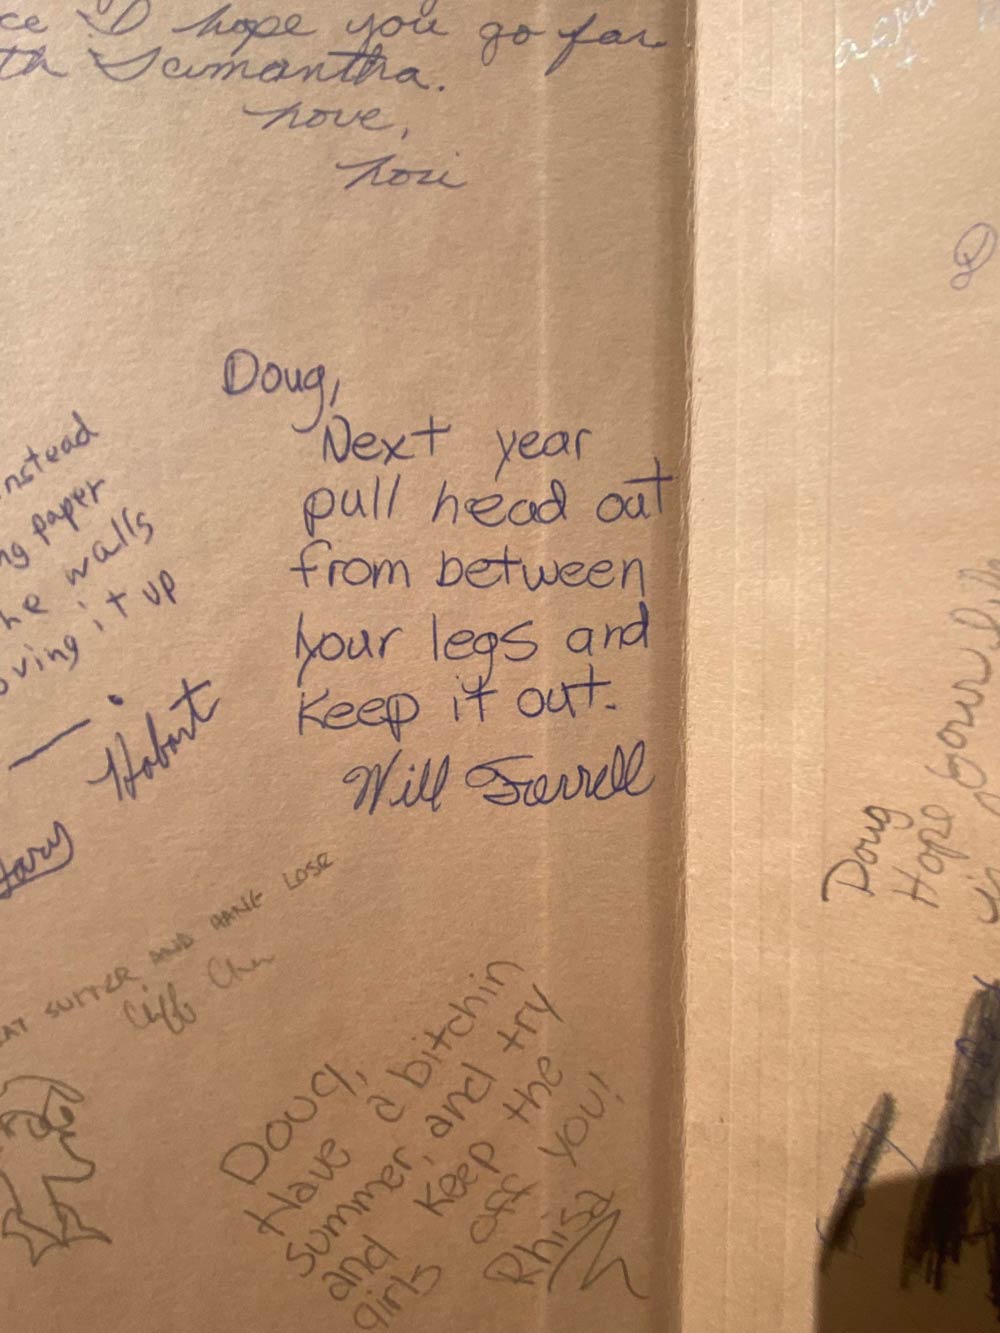 Will Ferrell's advice to my father in his junior high yearbook. They went to school together